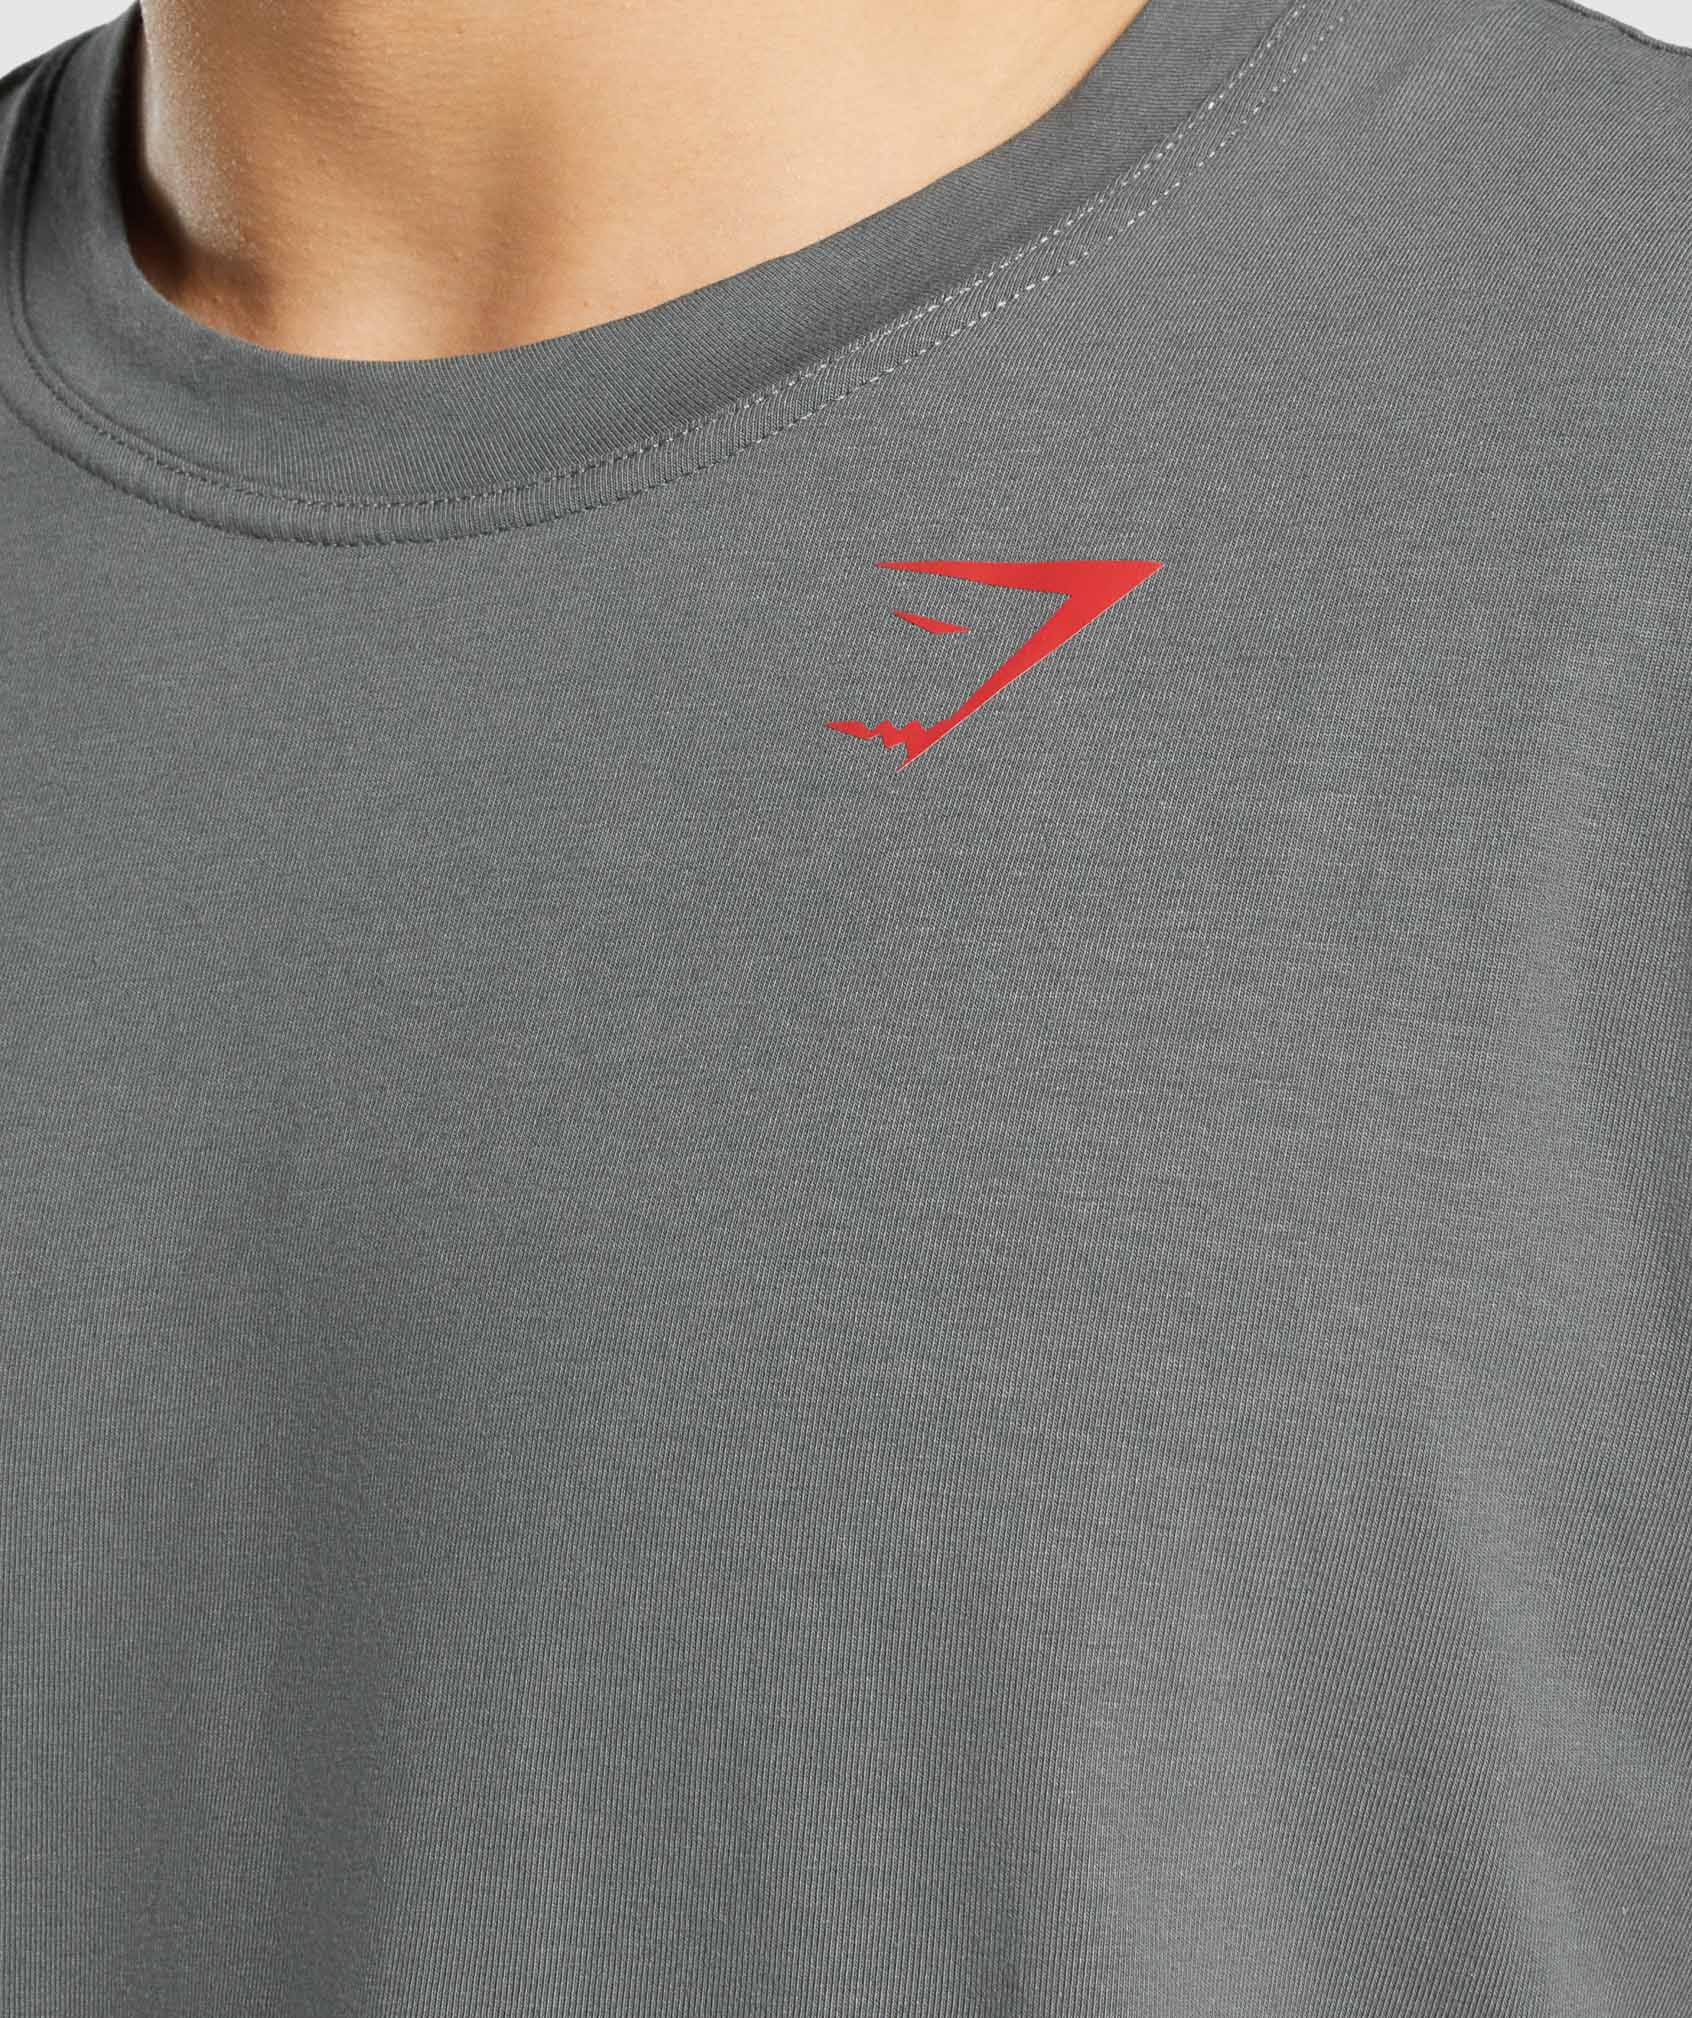 Power T-Shirt in Charcoal Grey